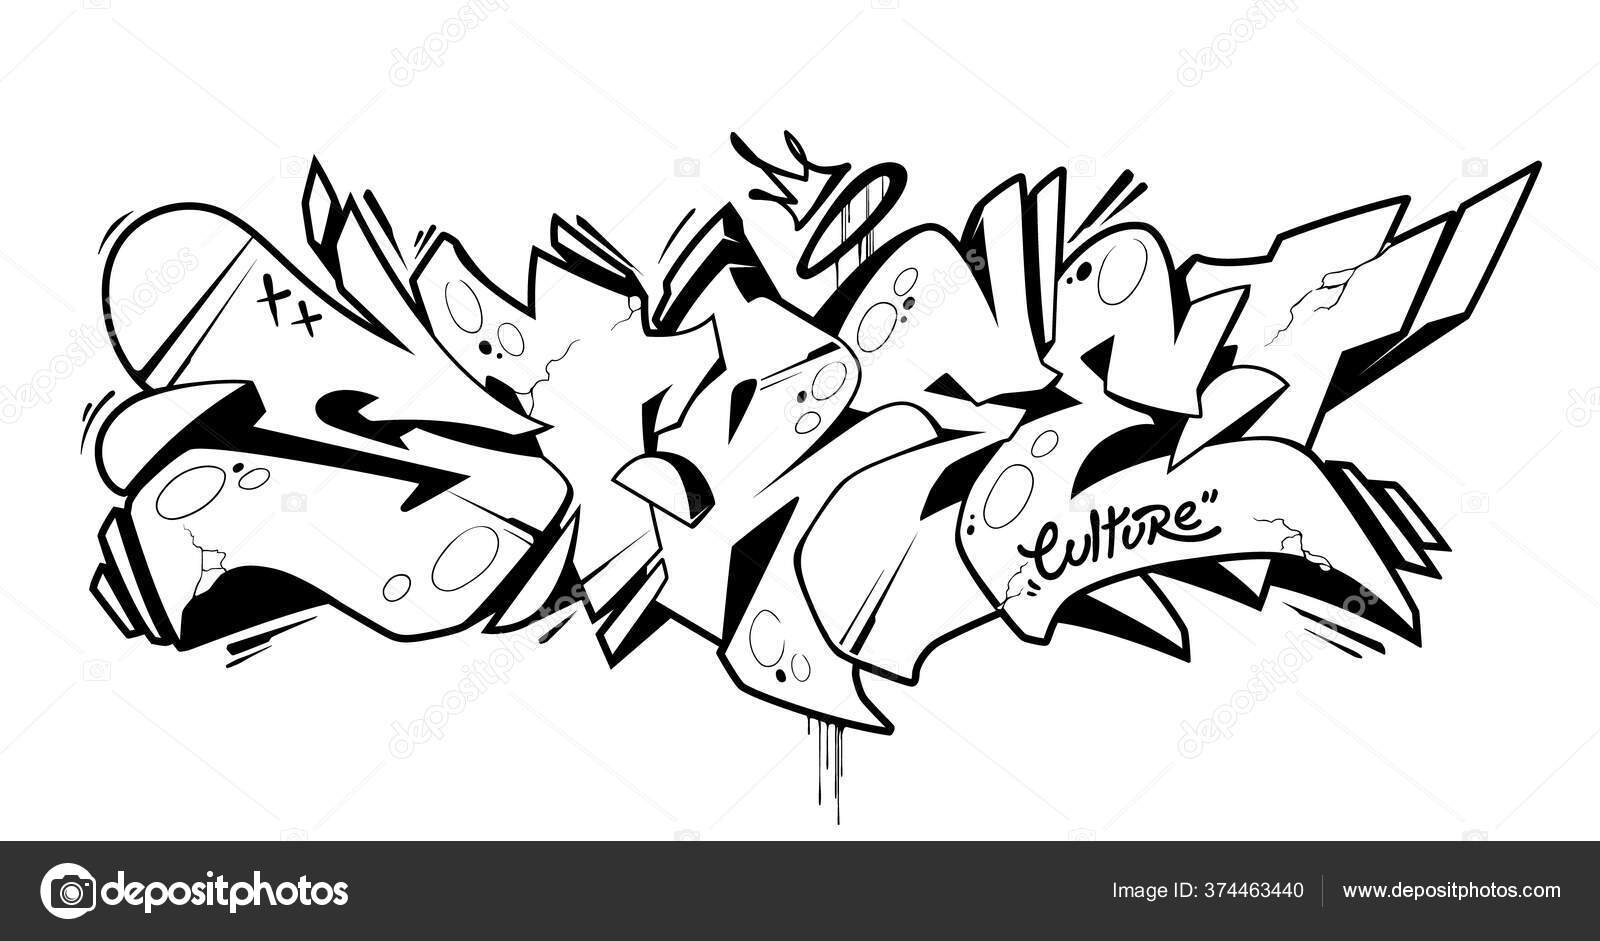 Wild style graffiti lettering street traditional block letters vector illustration stock vector by vecster